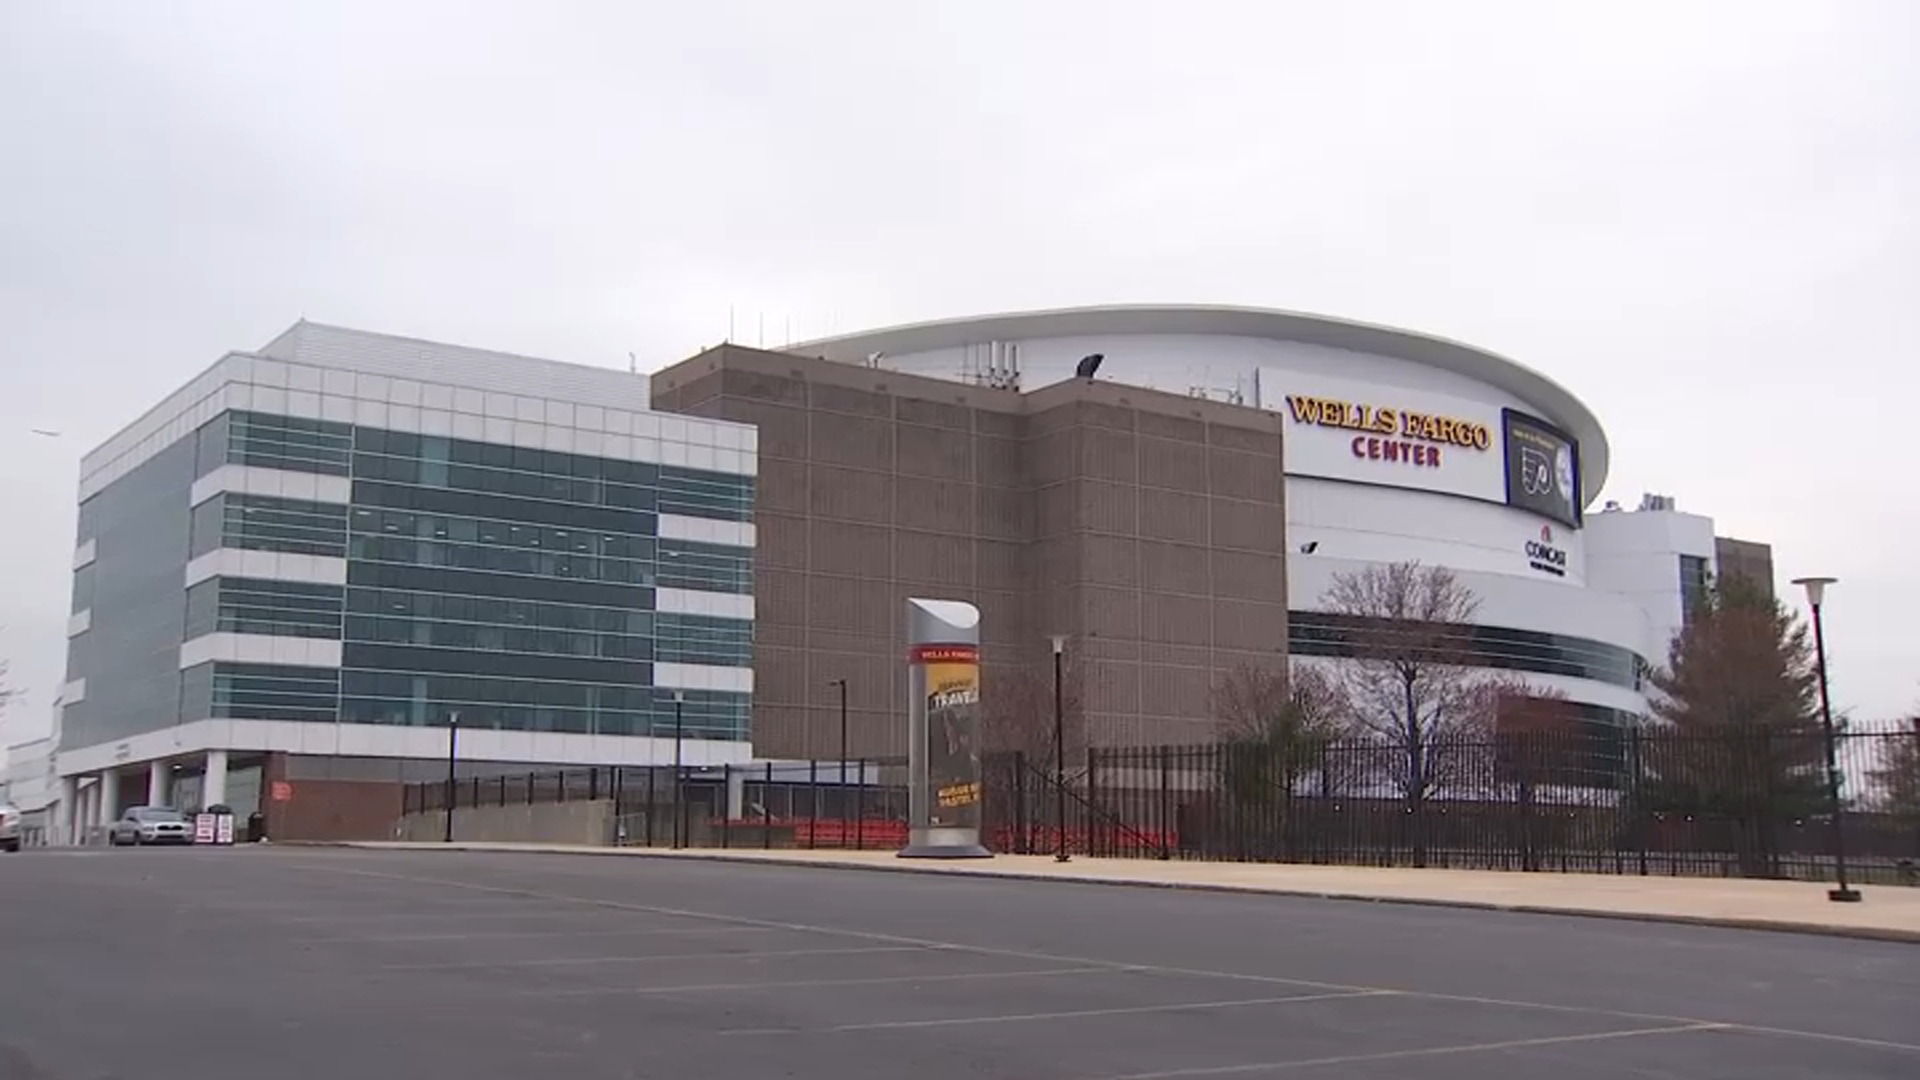 These are the Wells Fargo Center COVID-19 rules to know before you go